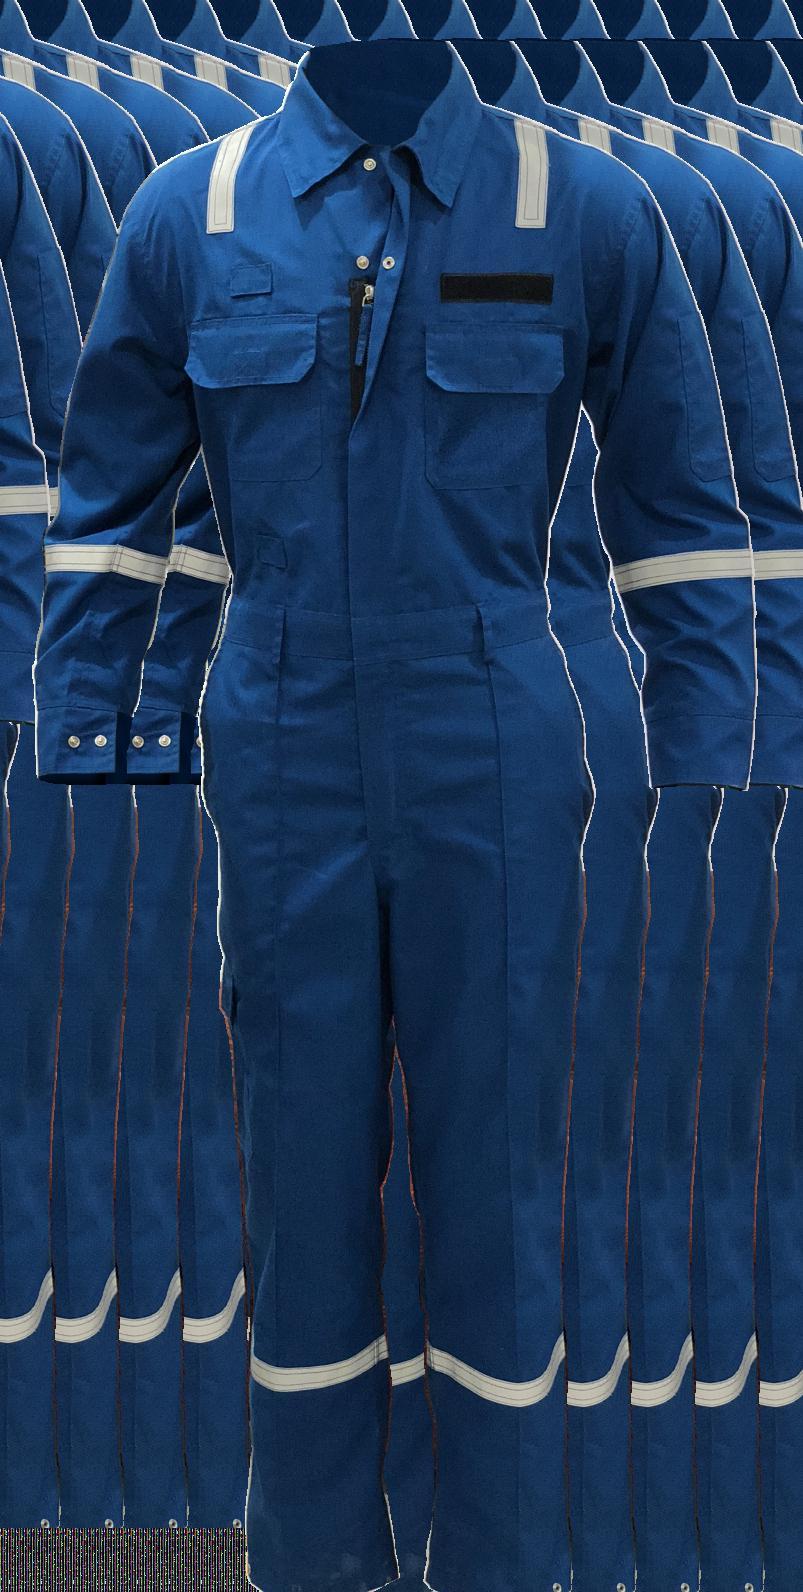 Coverall Overall Dangree BoilerSuit Hanger Loop Flat Safety